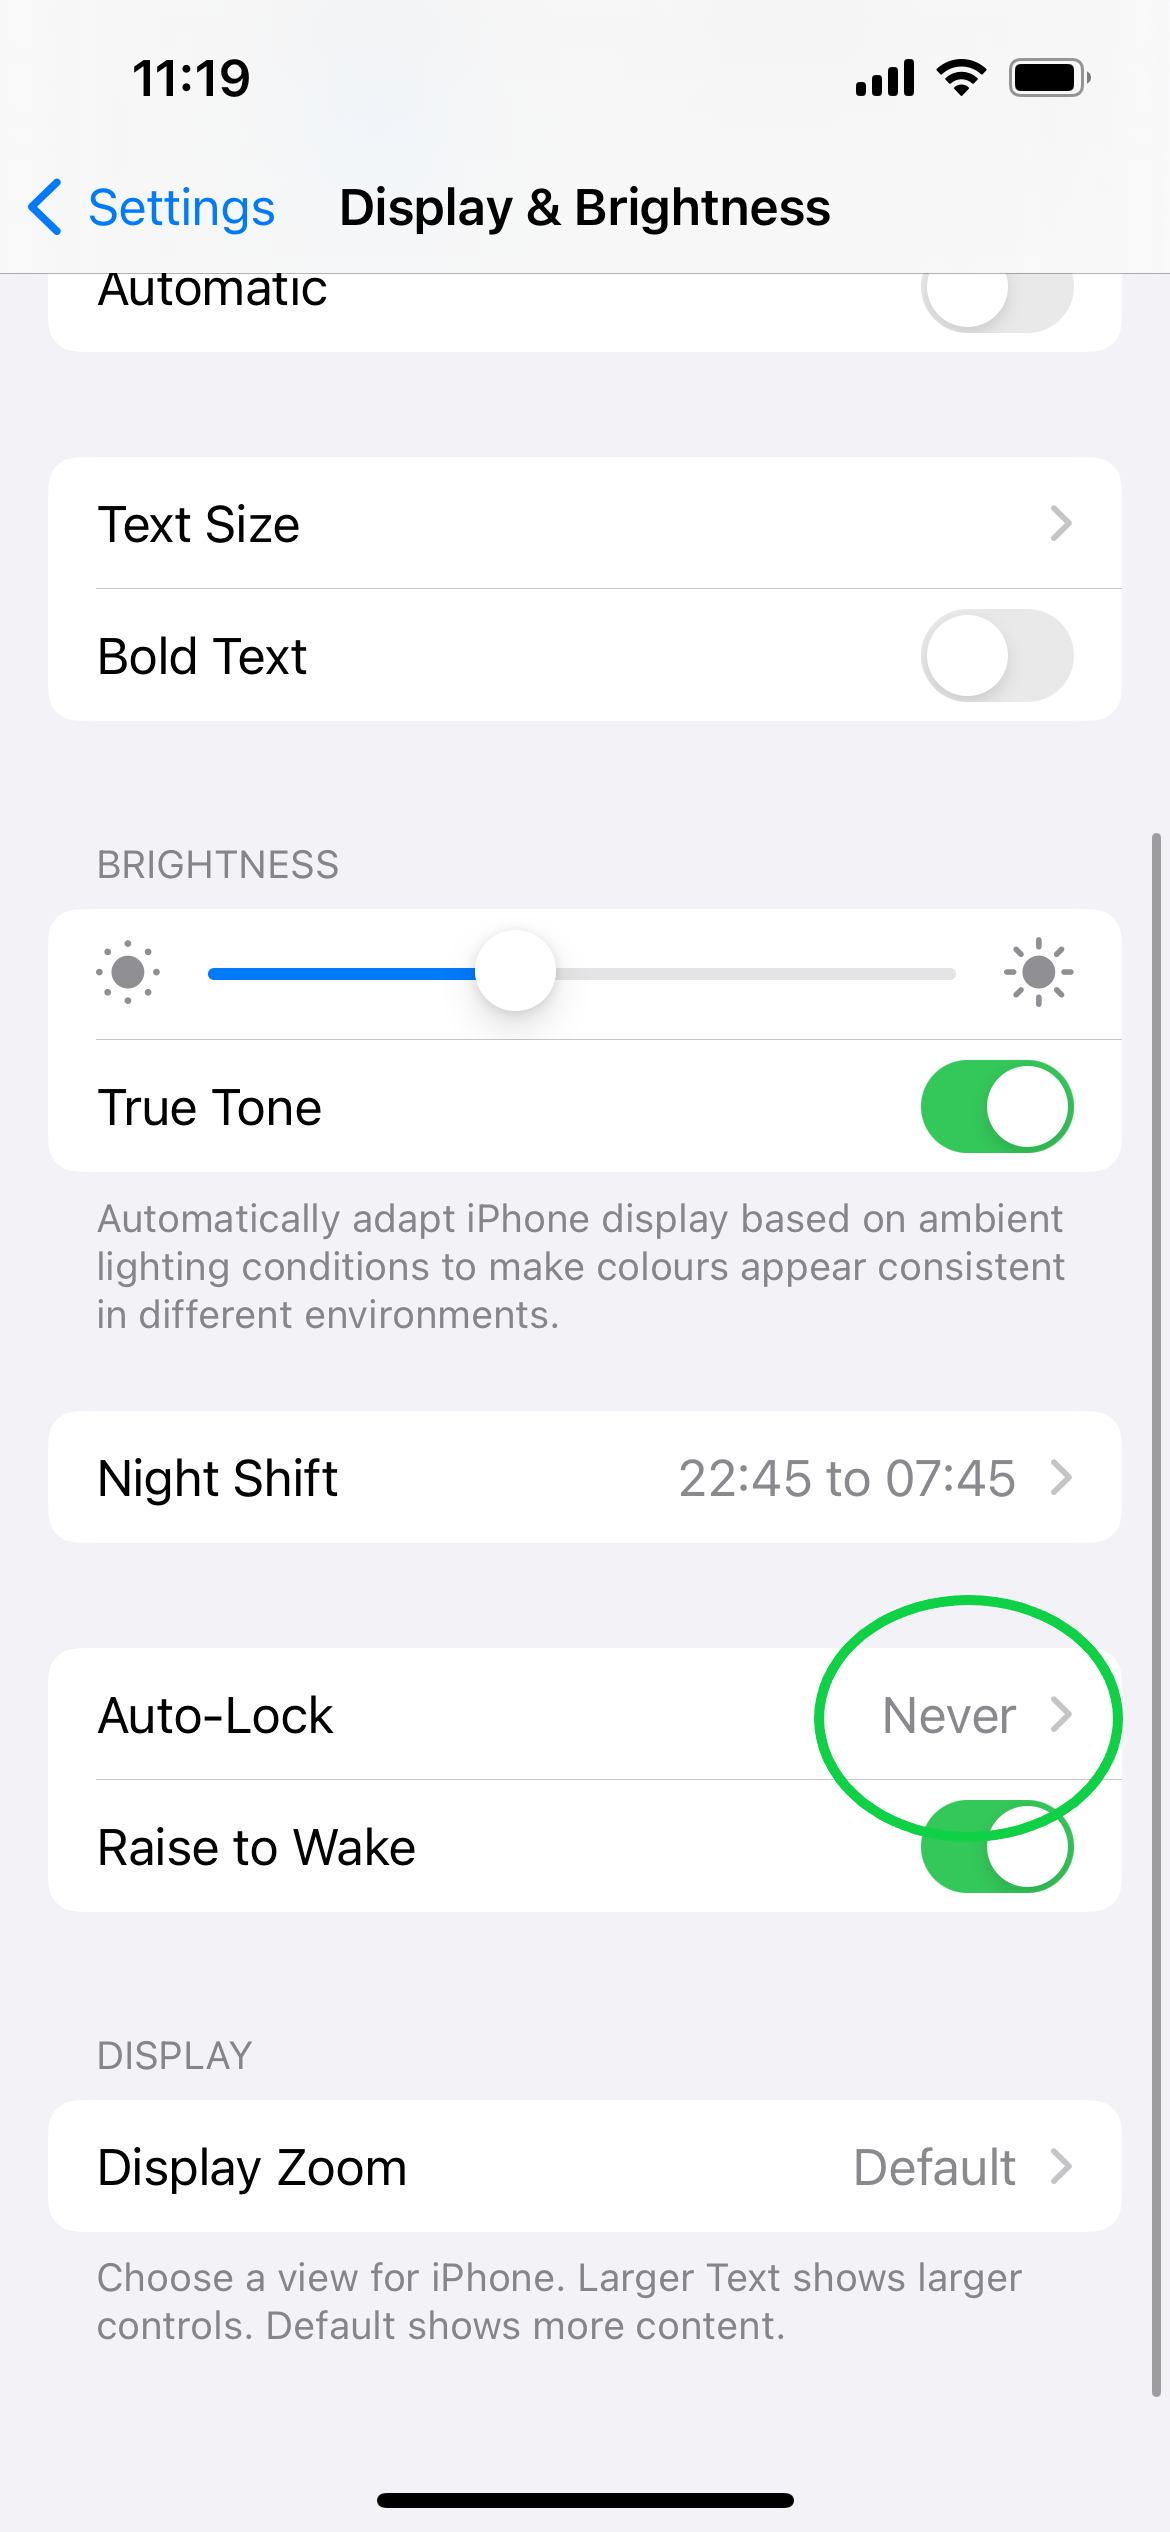 How to set screen timeout on iPhone